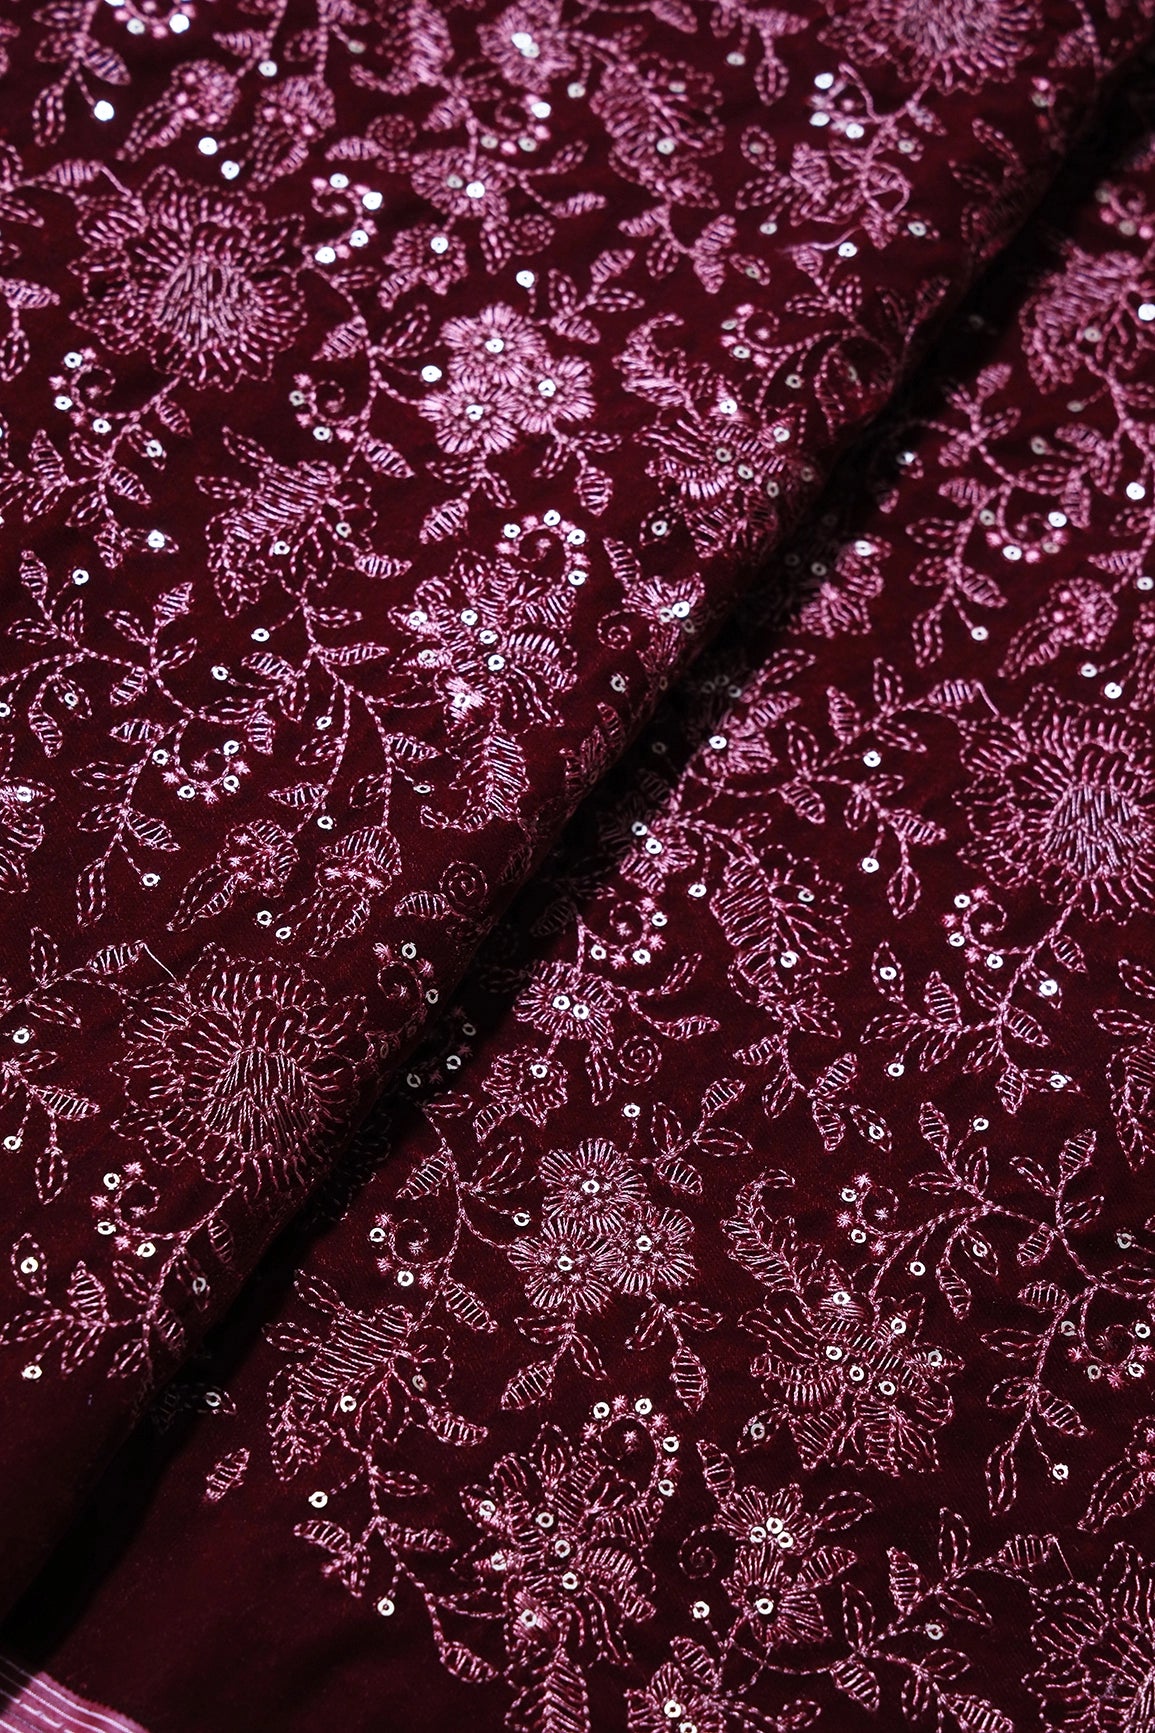 Maroon Thread With Gold Sequins Floral Embroidery Work On Maroon Velvet Fabric